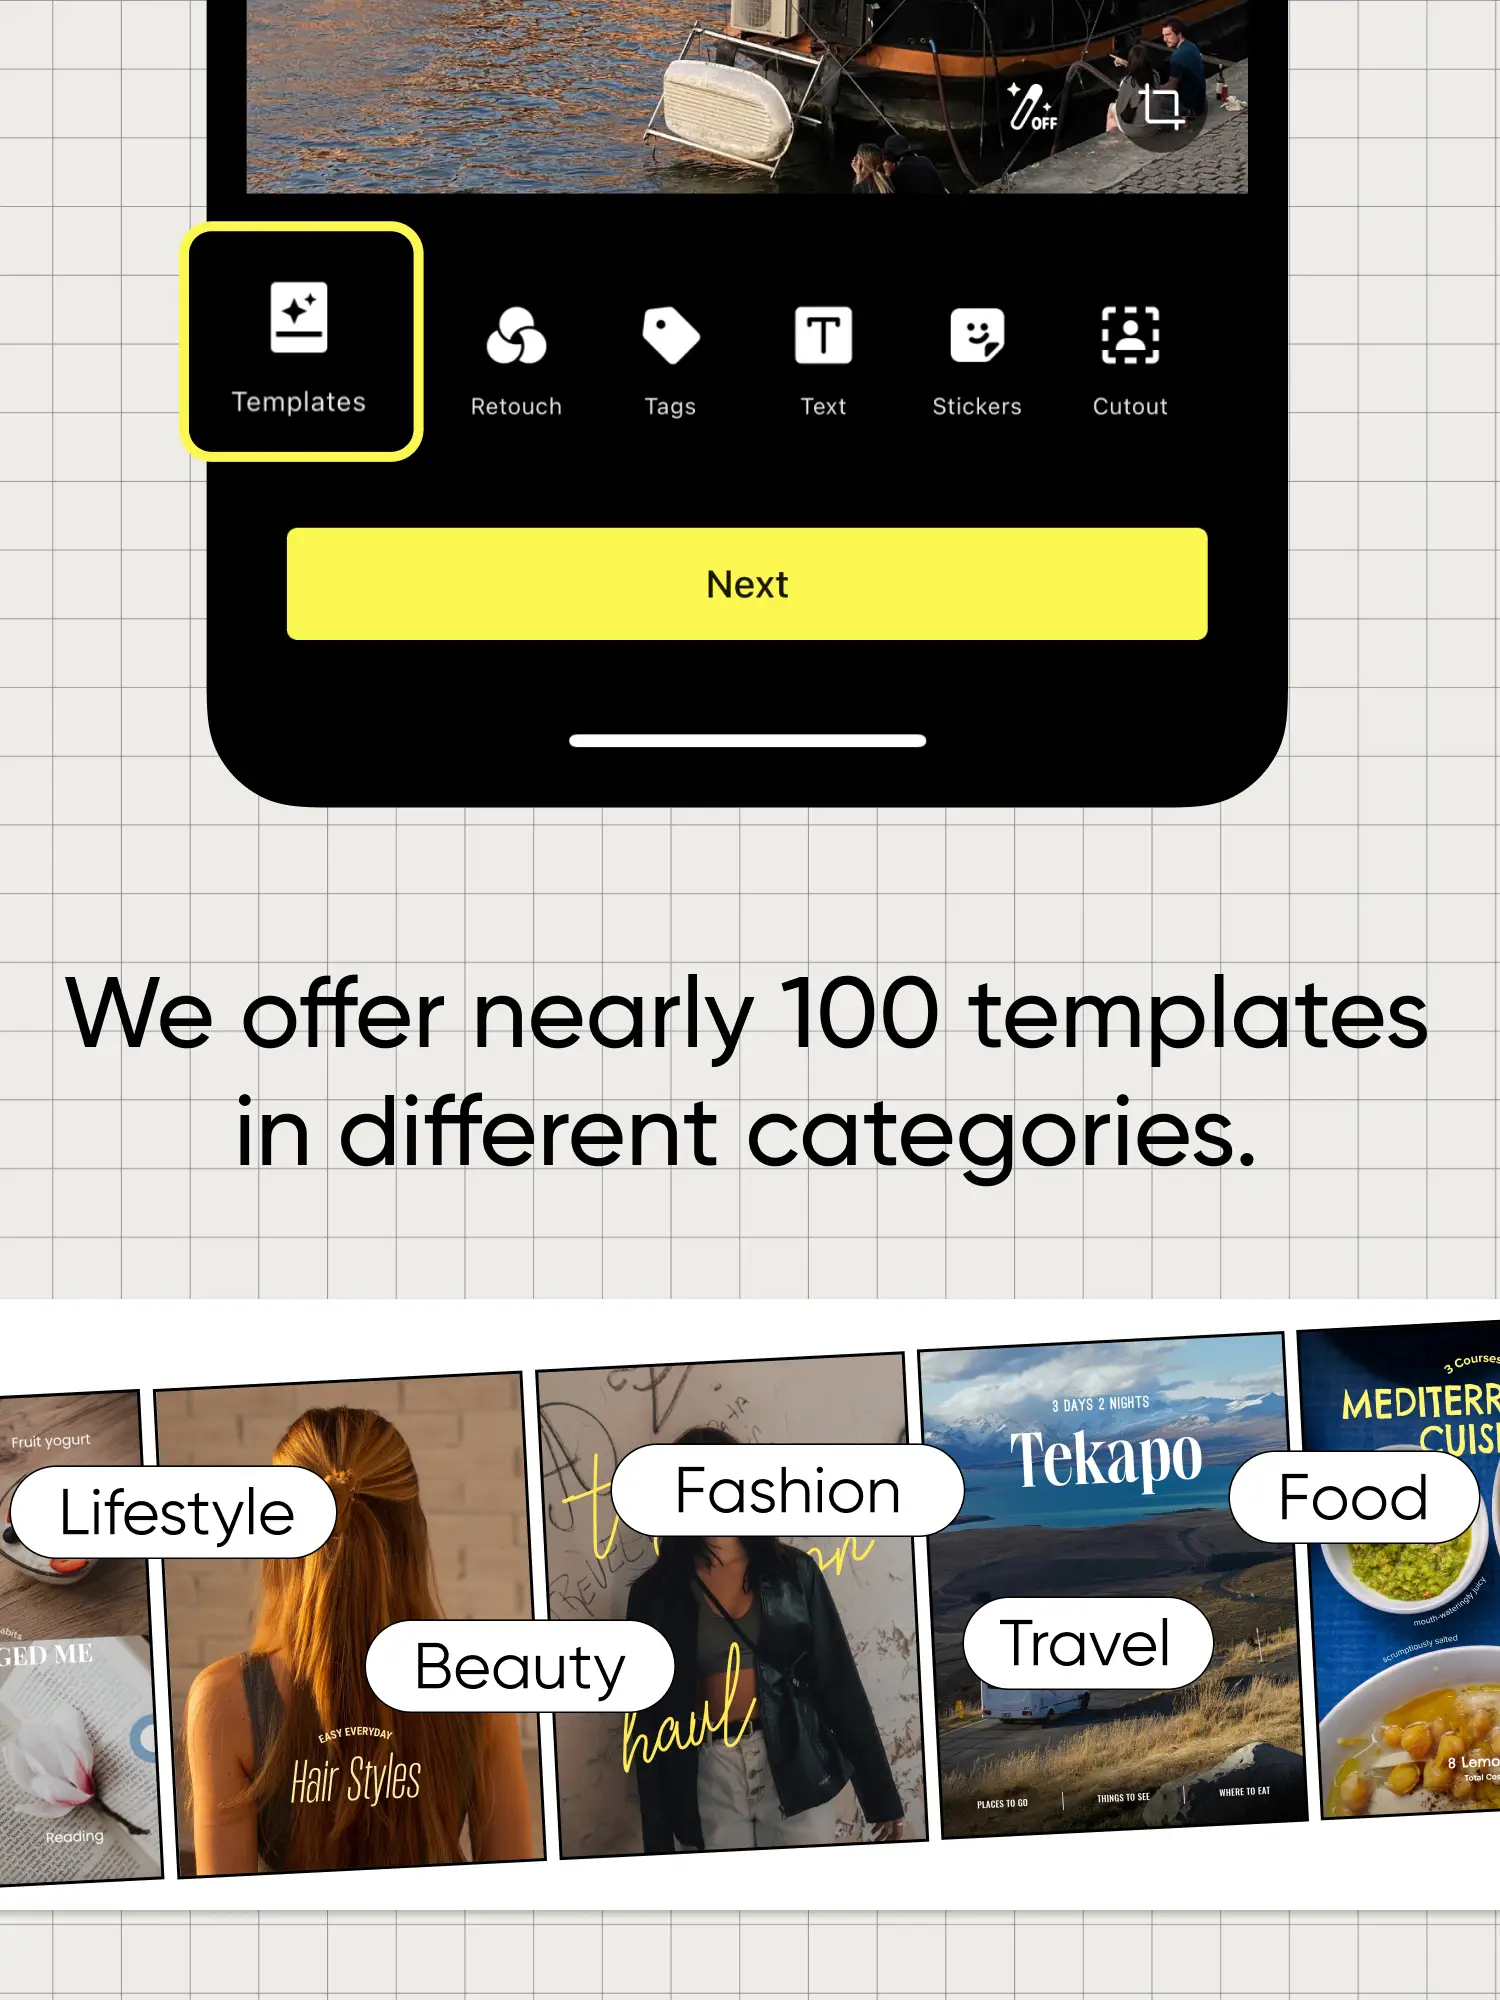  A list of different categories of templates.